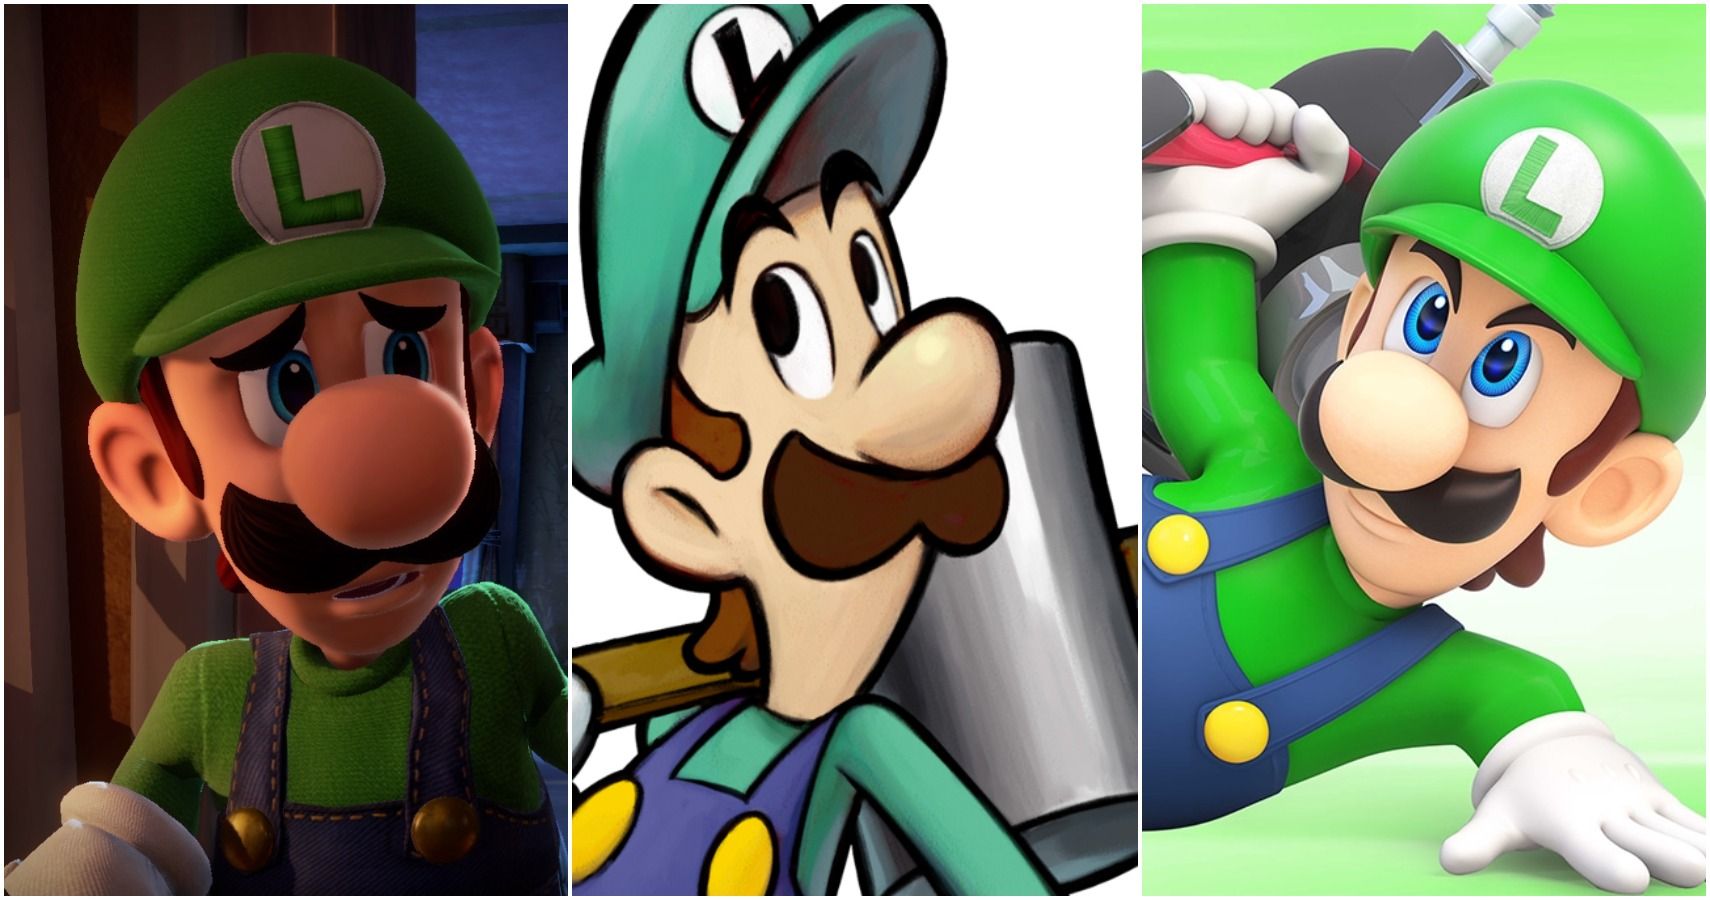 Super Mario Bros.: The First 10 Games Luigi Was Playable In